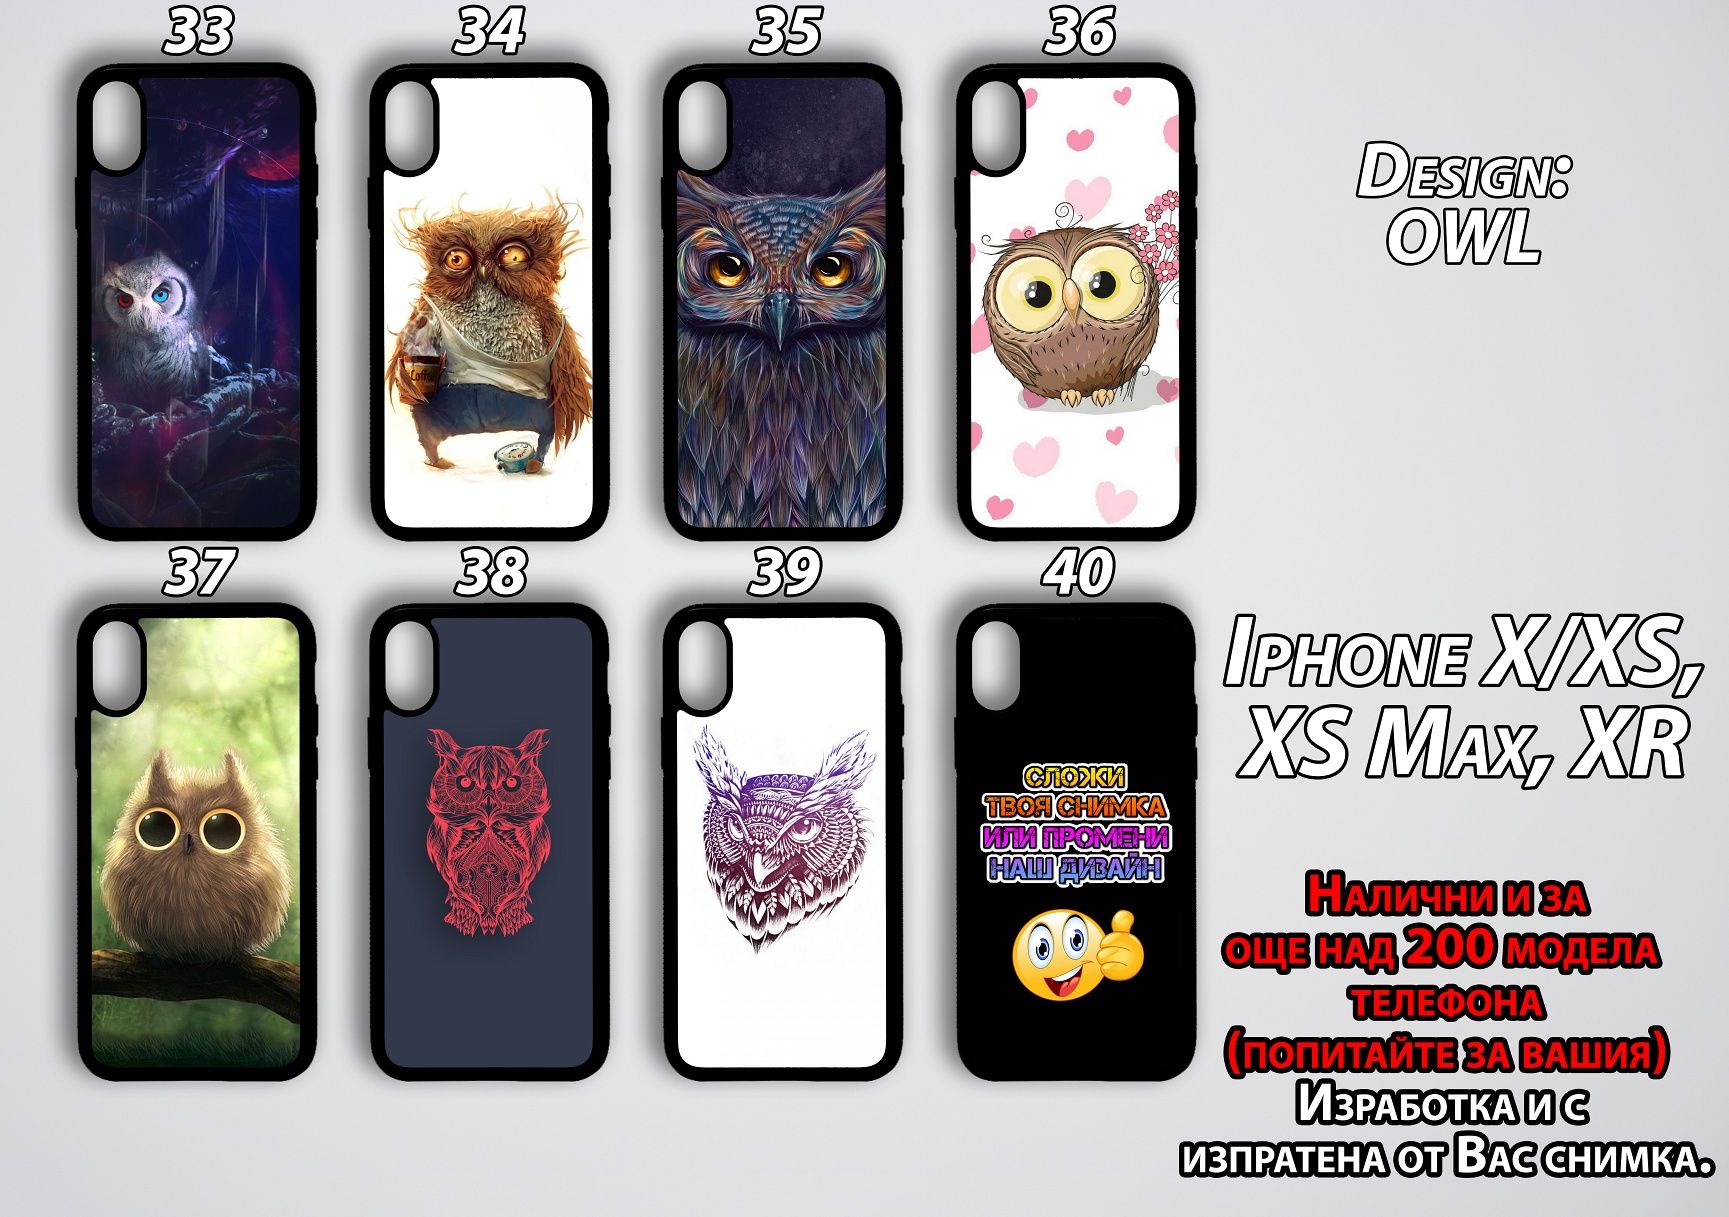 mobile phone cases Owl 33